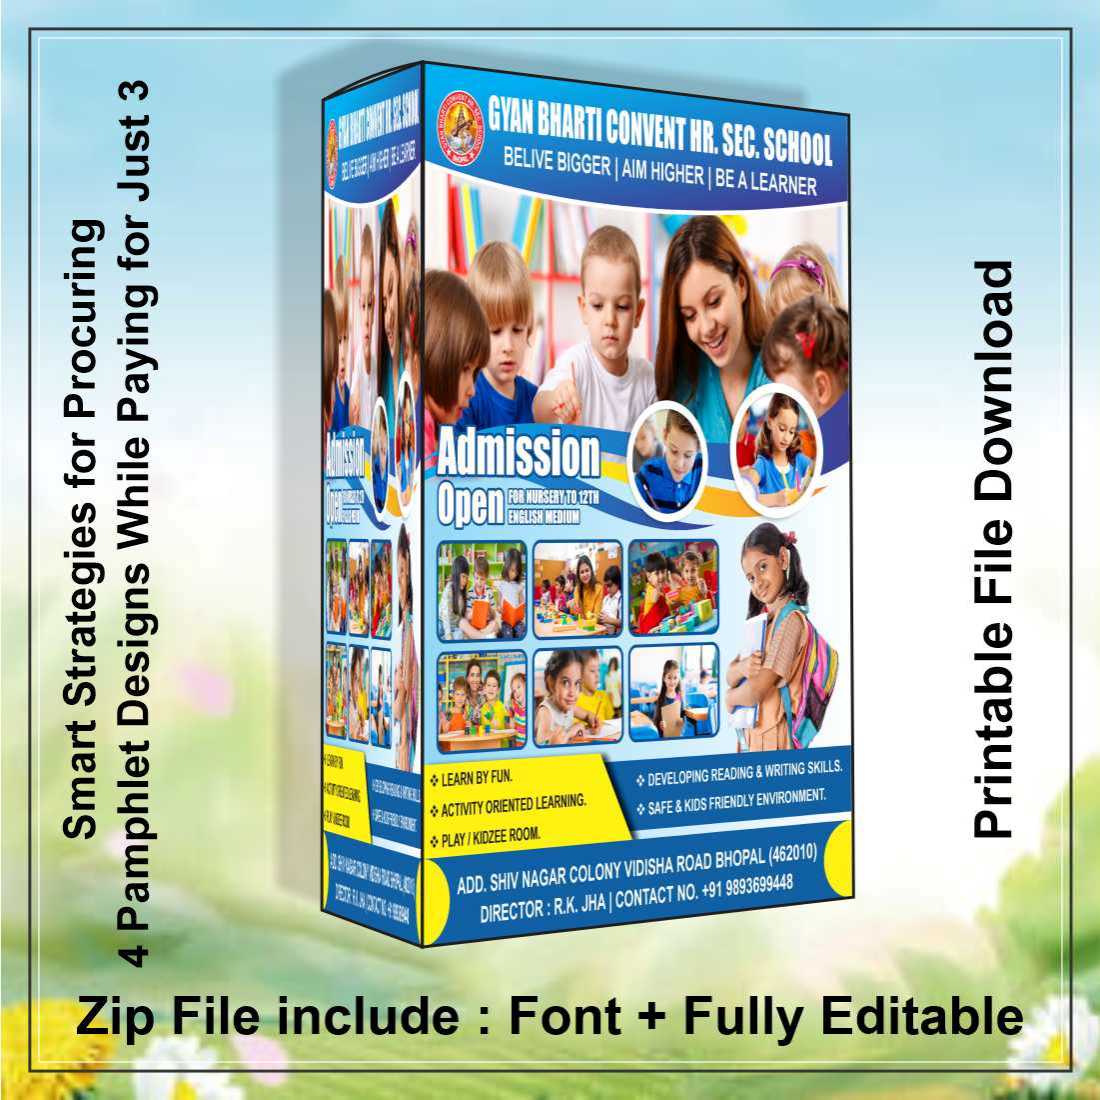 Smart Strategies for Procuring 4 Pamphlet Designs While Paying for Just 3 preview image.